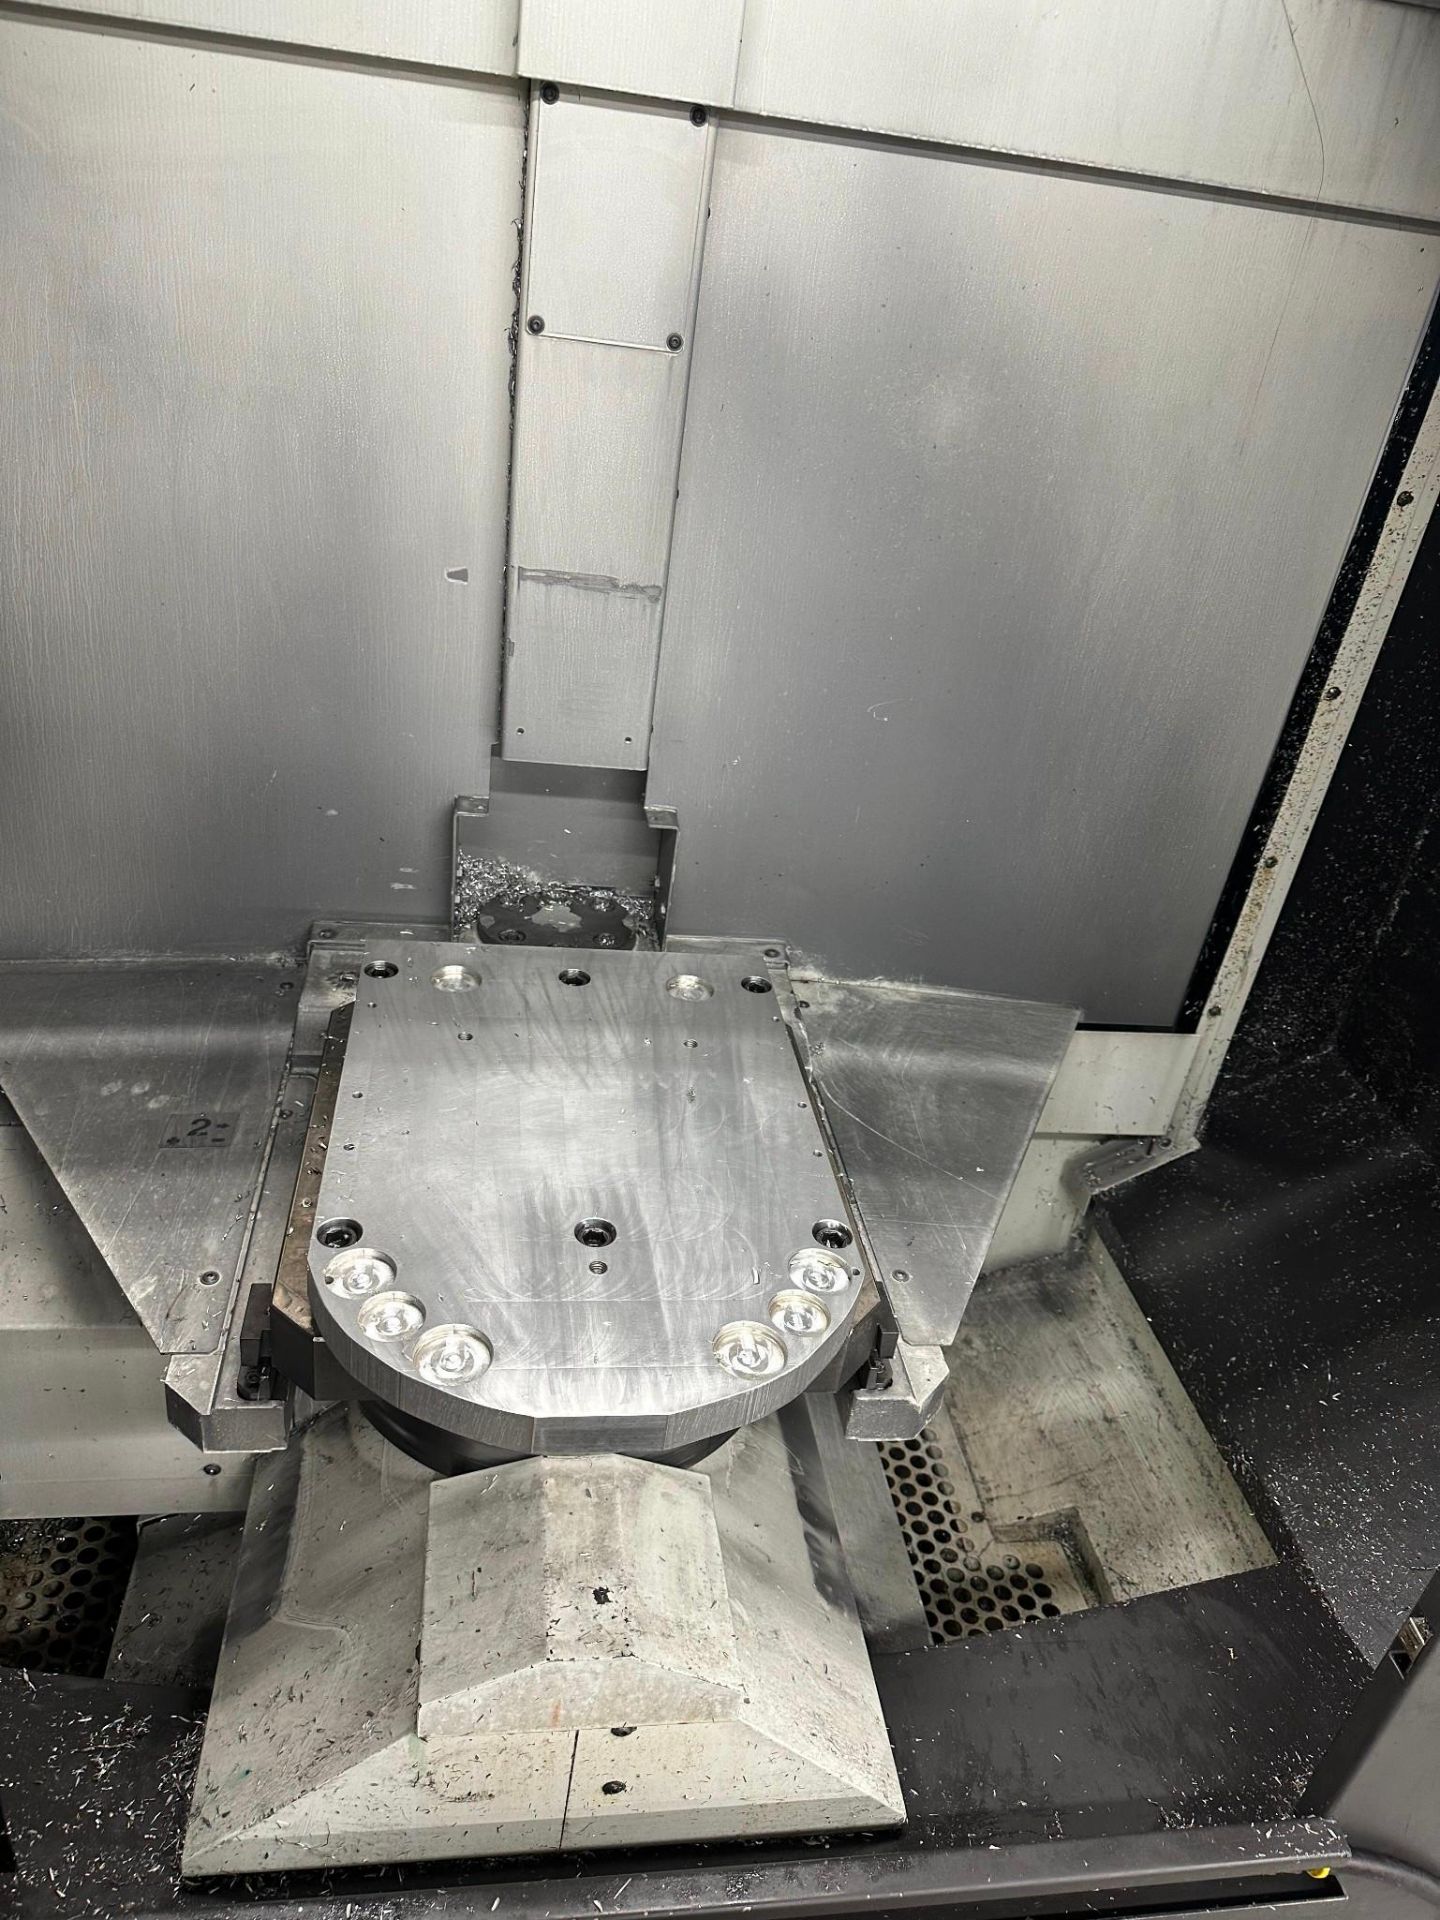 KITAMURA MYCENTER HX400IG HMC, 2018 - FULL 4TH AXIS, CTS, LINEAR SCALES - Image 3 of 17